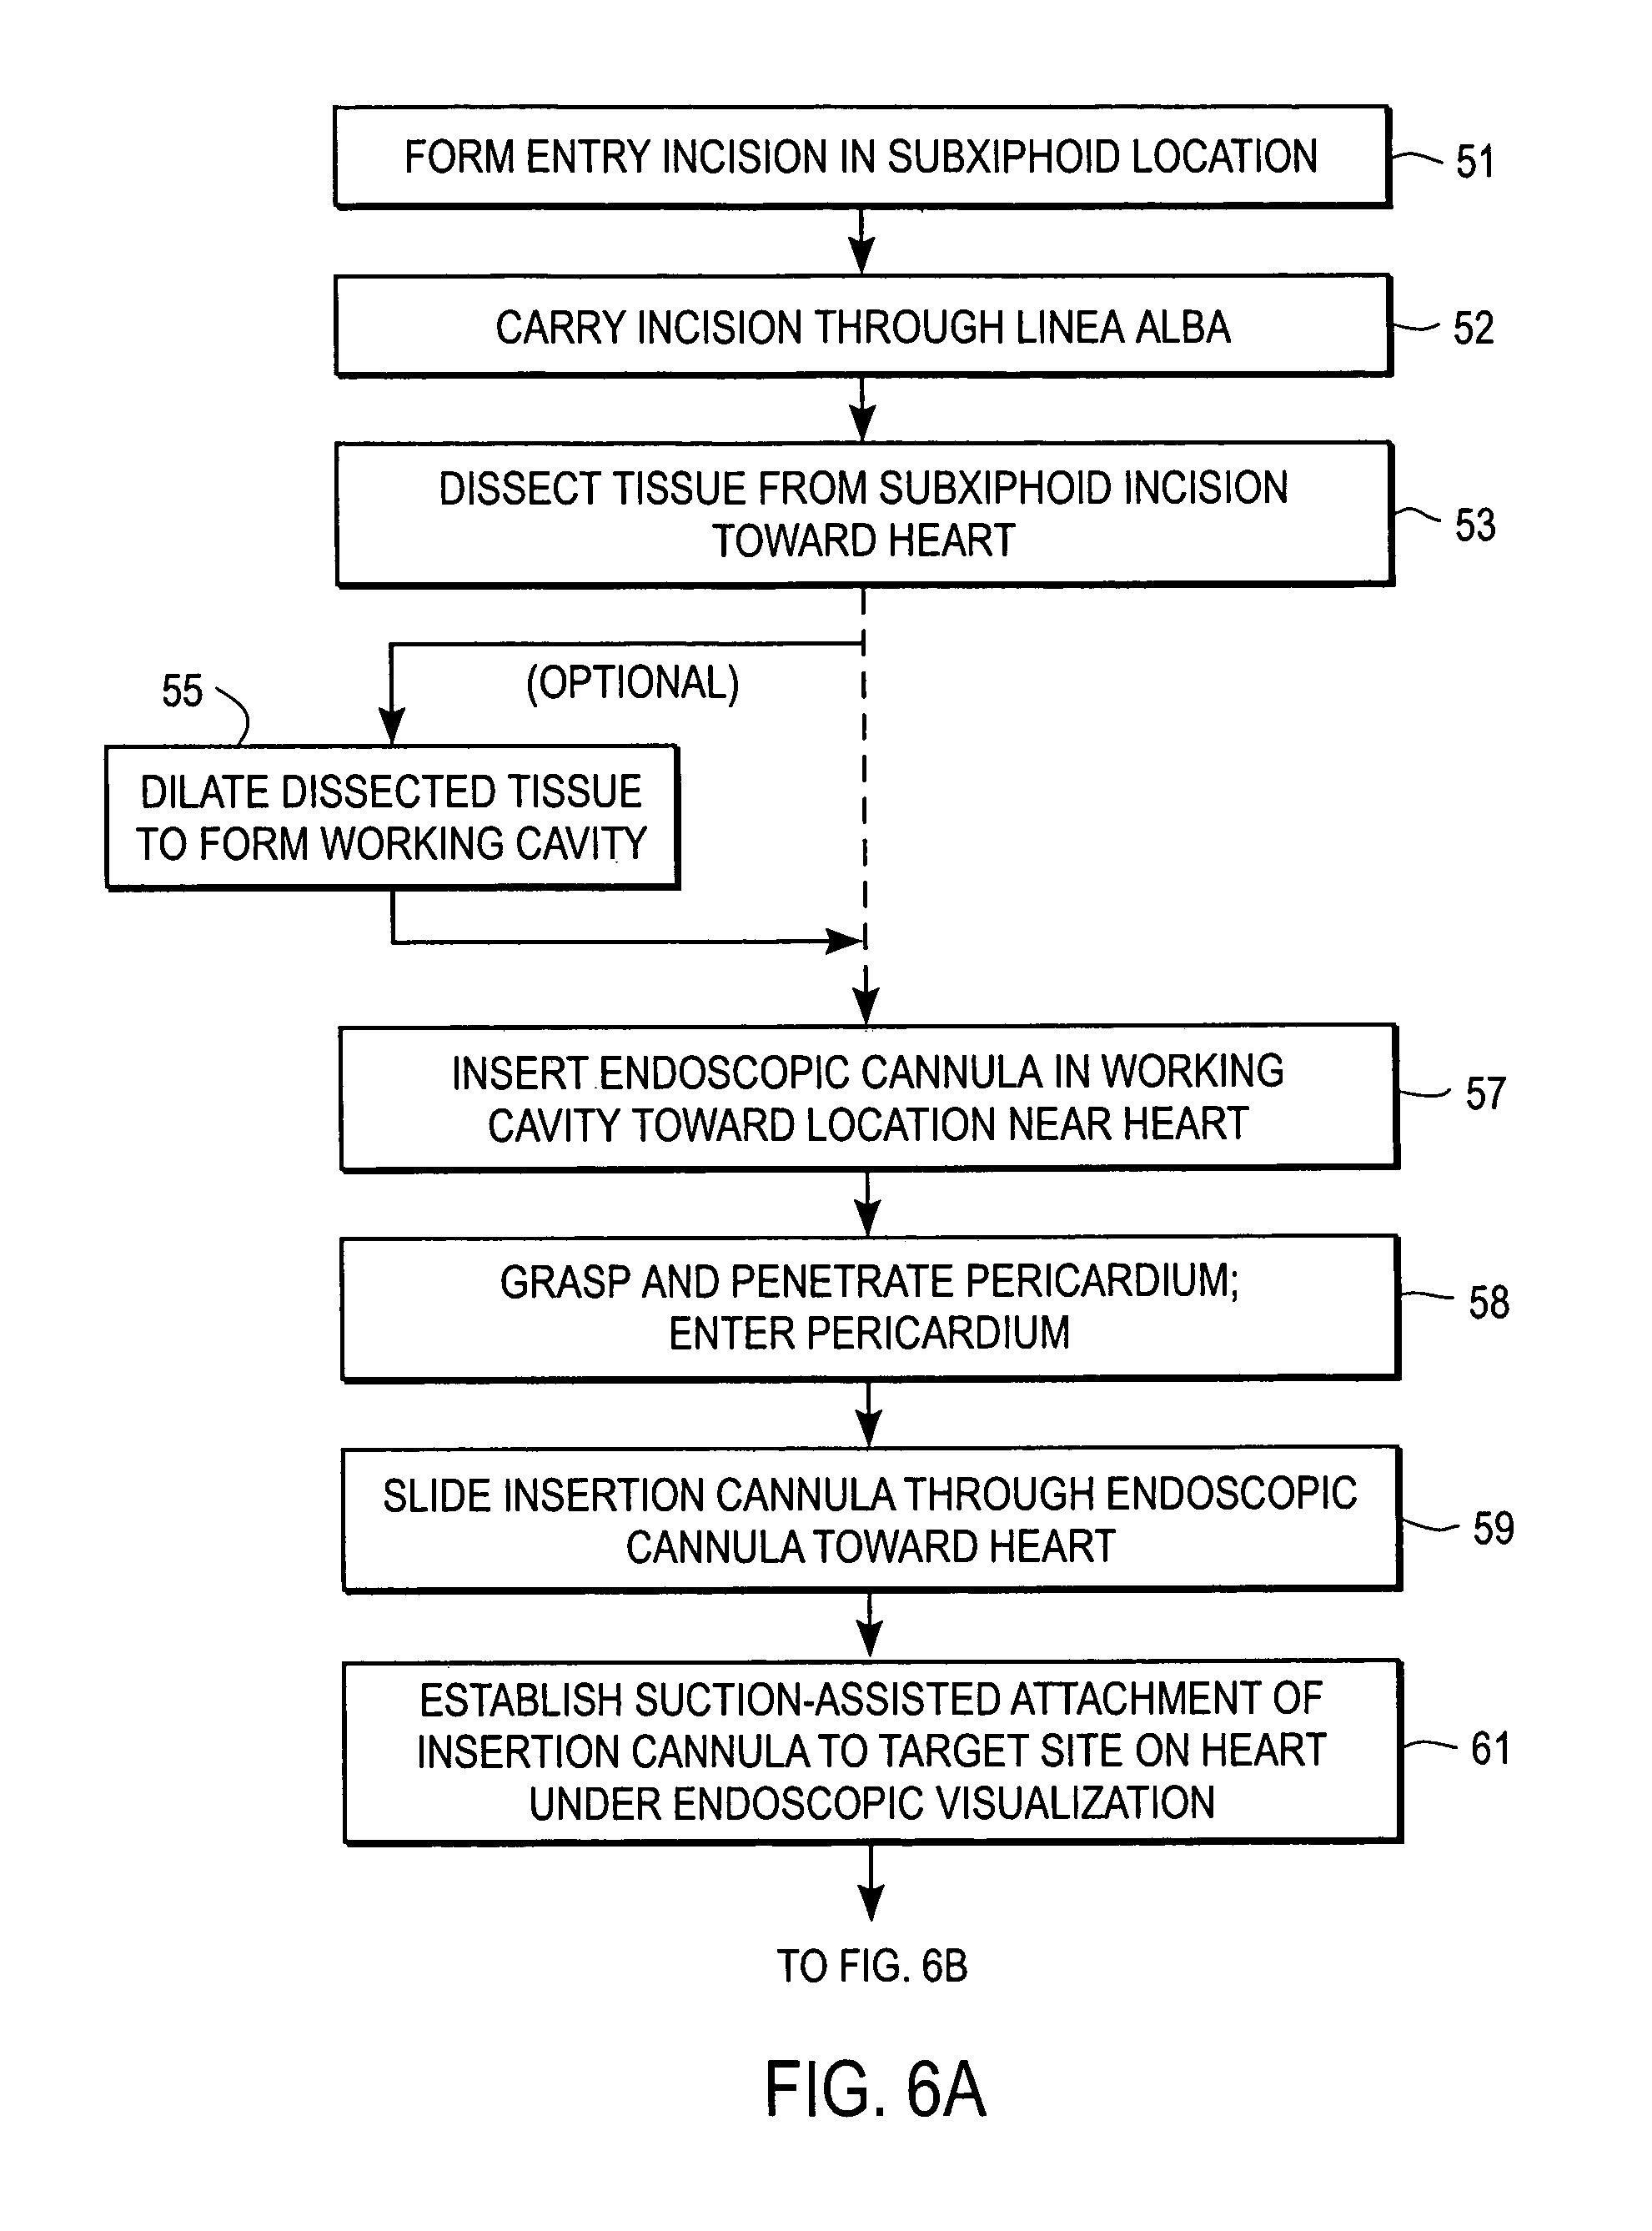 Apparatus for endoscopic cardiac mapping and lead placement